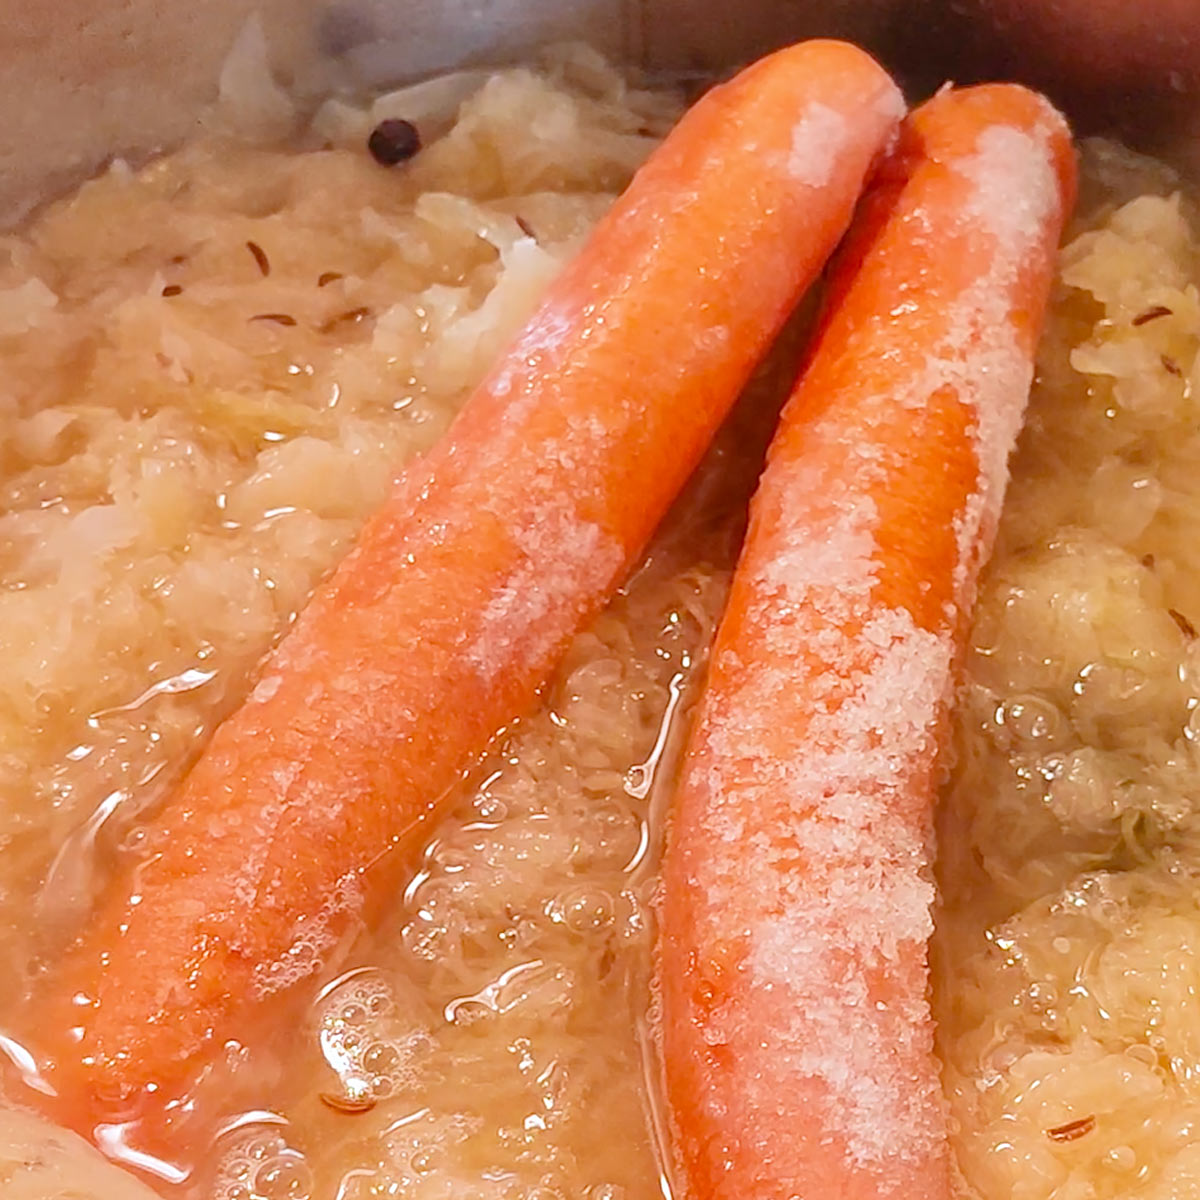 add sausages to sauerkraut over the stove top